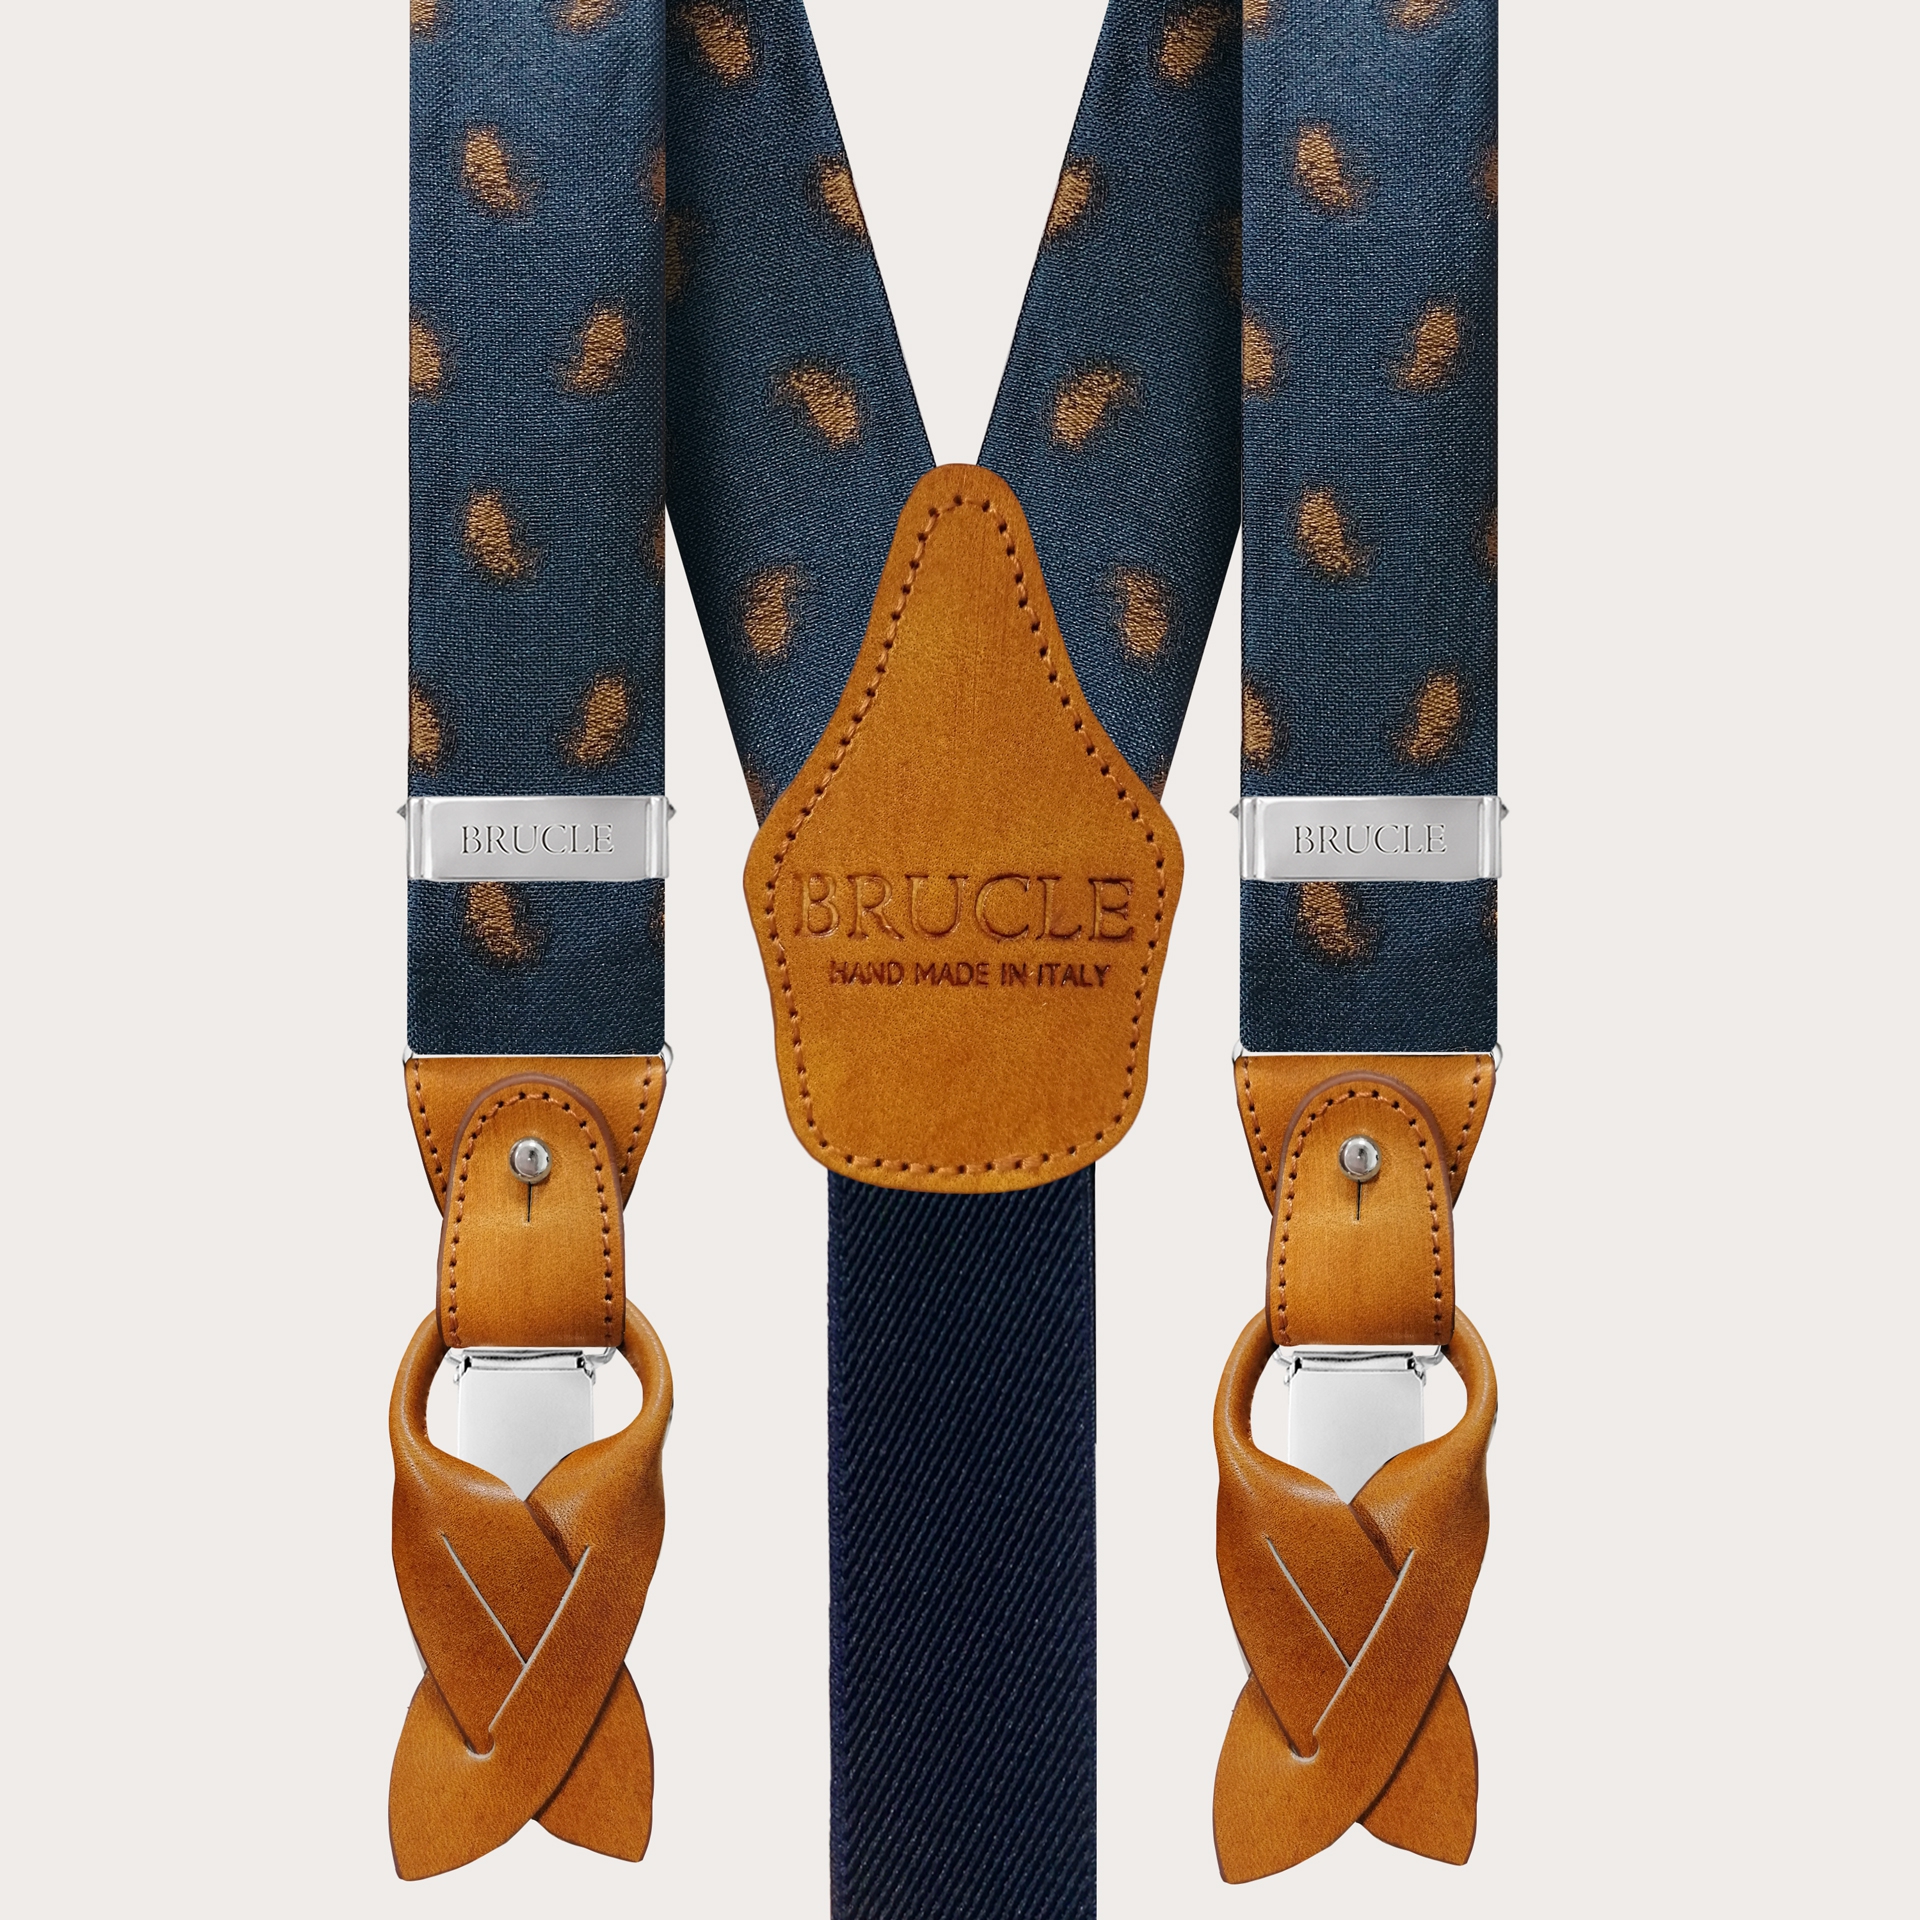 Formal Y-shape silk tubular suspenders, blue with faded paisley pattern